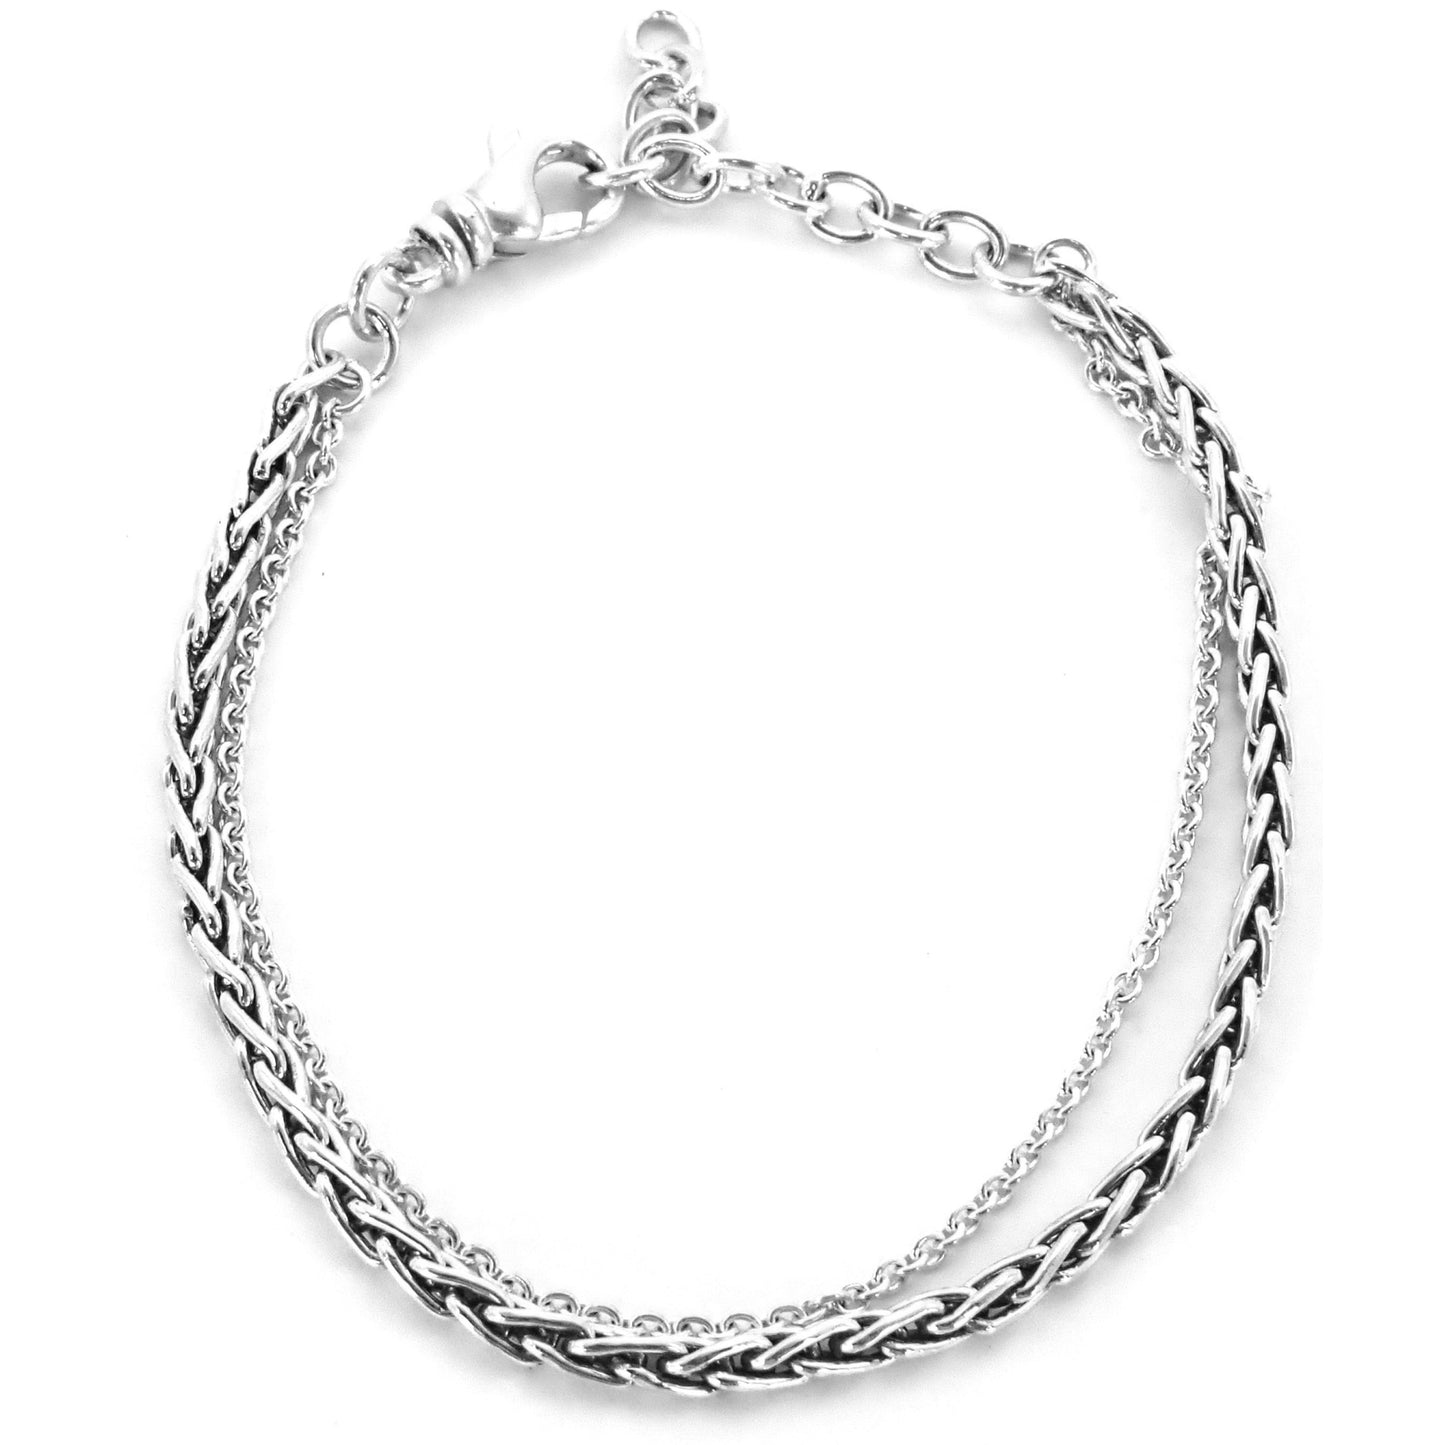 Silver chain bracelet with one wheat chain and one thin machine chain, and a lobster clasp.